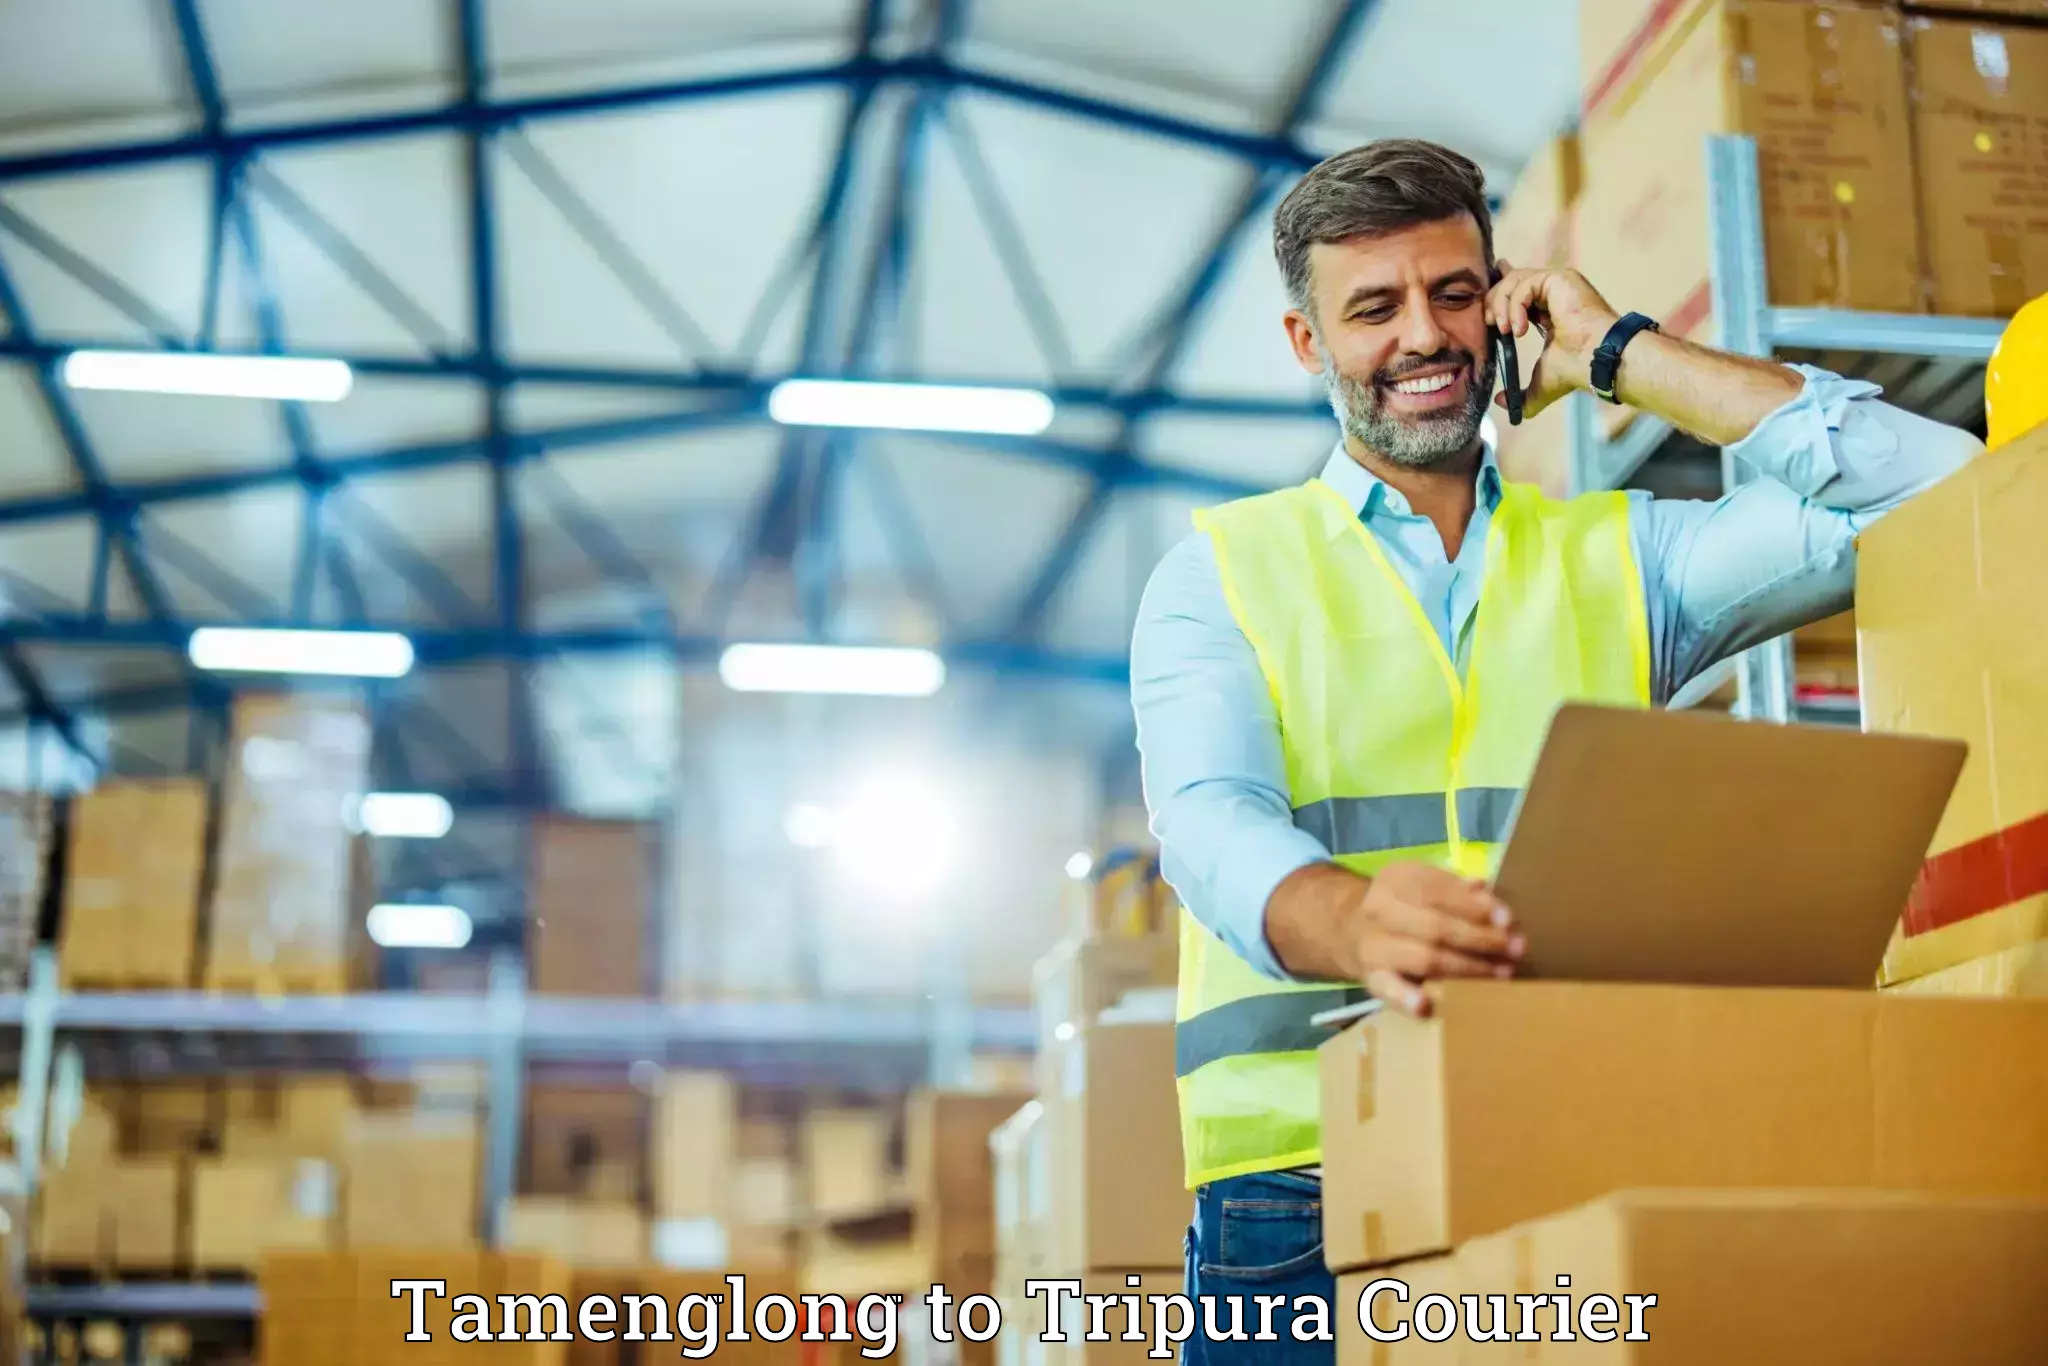 Luggage shipment specialists Tamenglong to Tripura